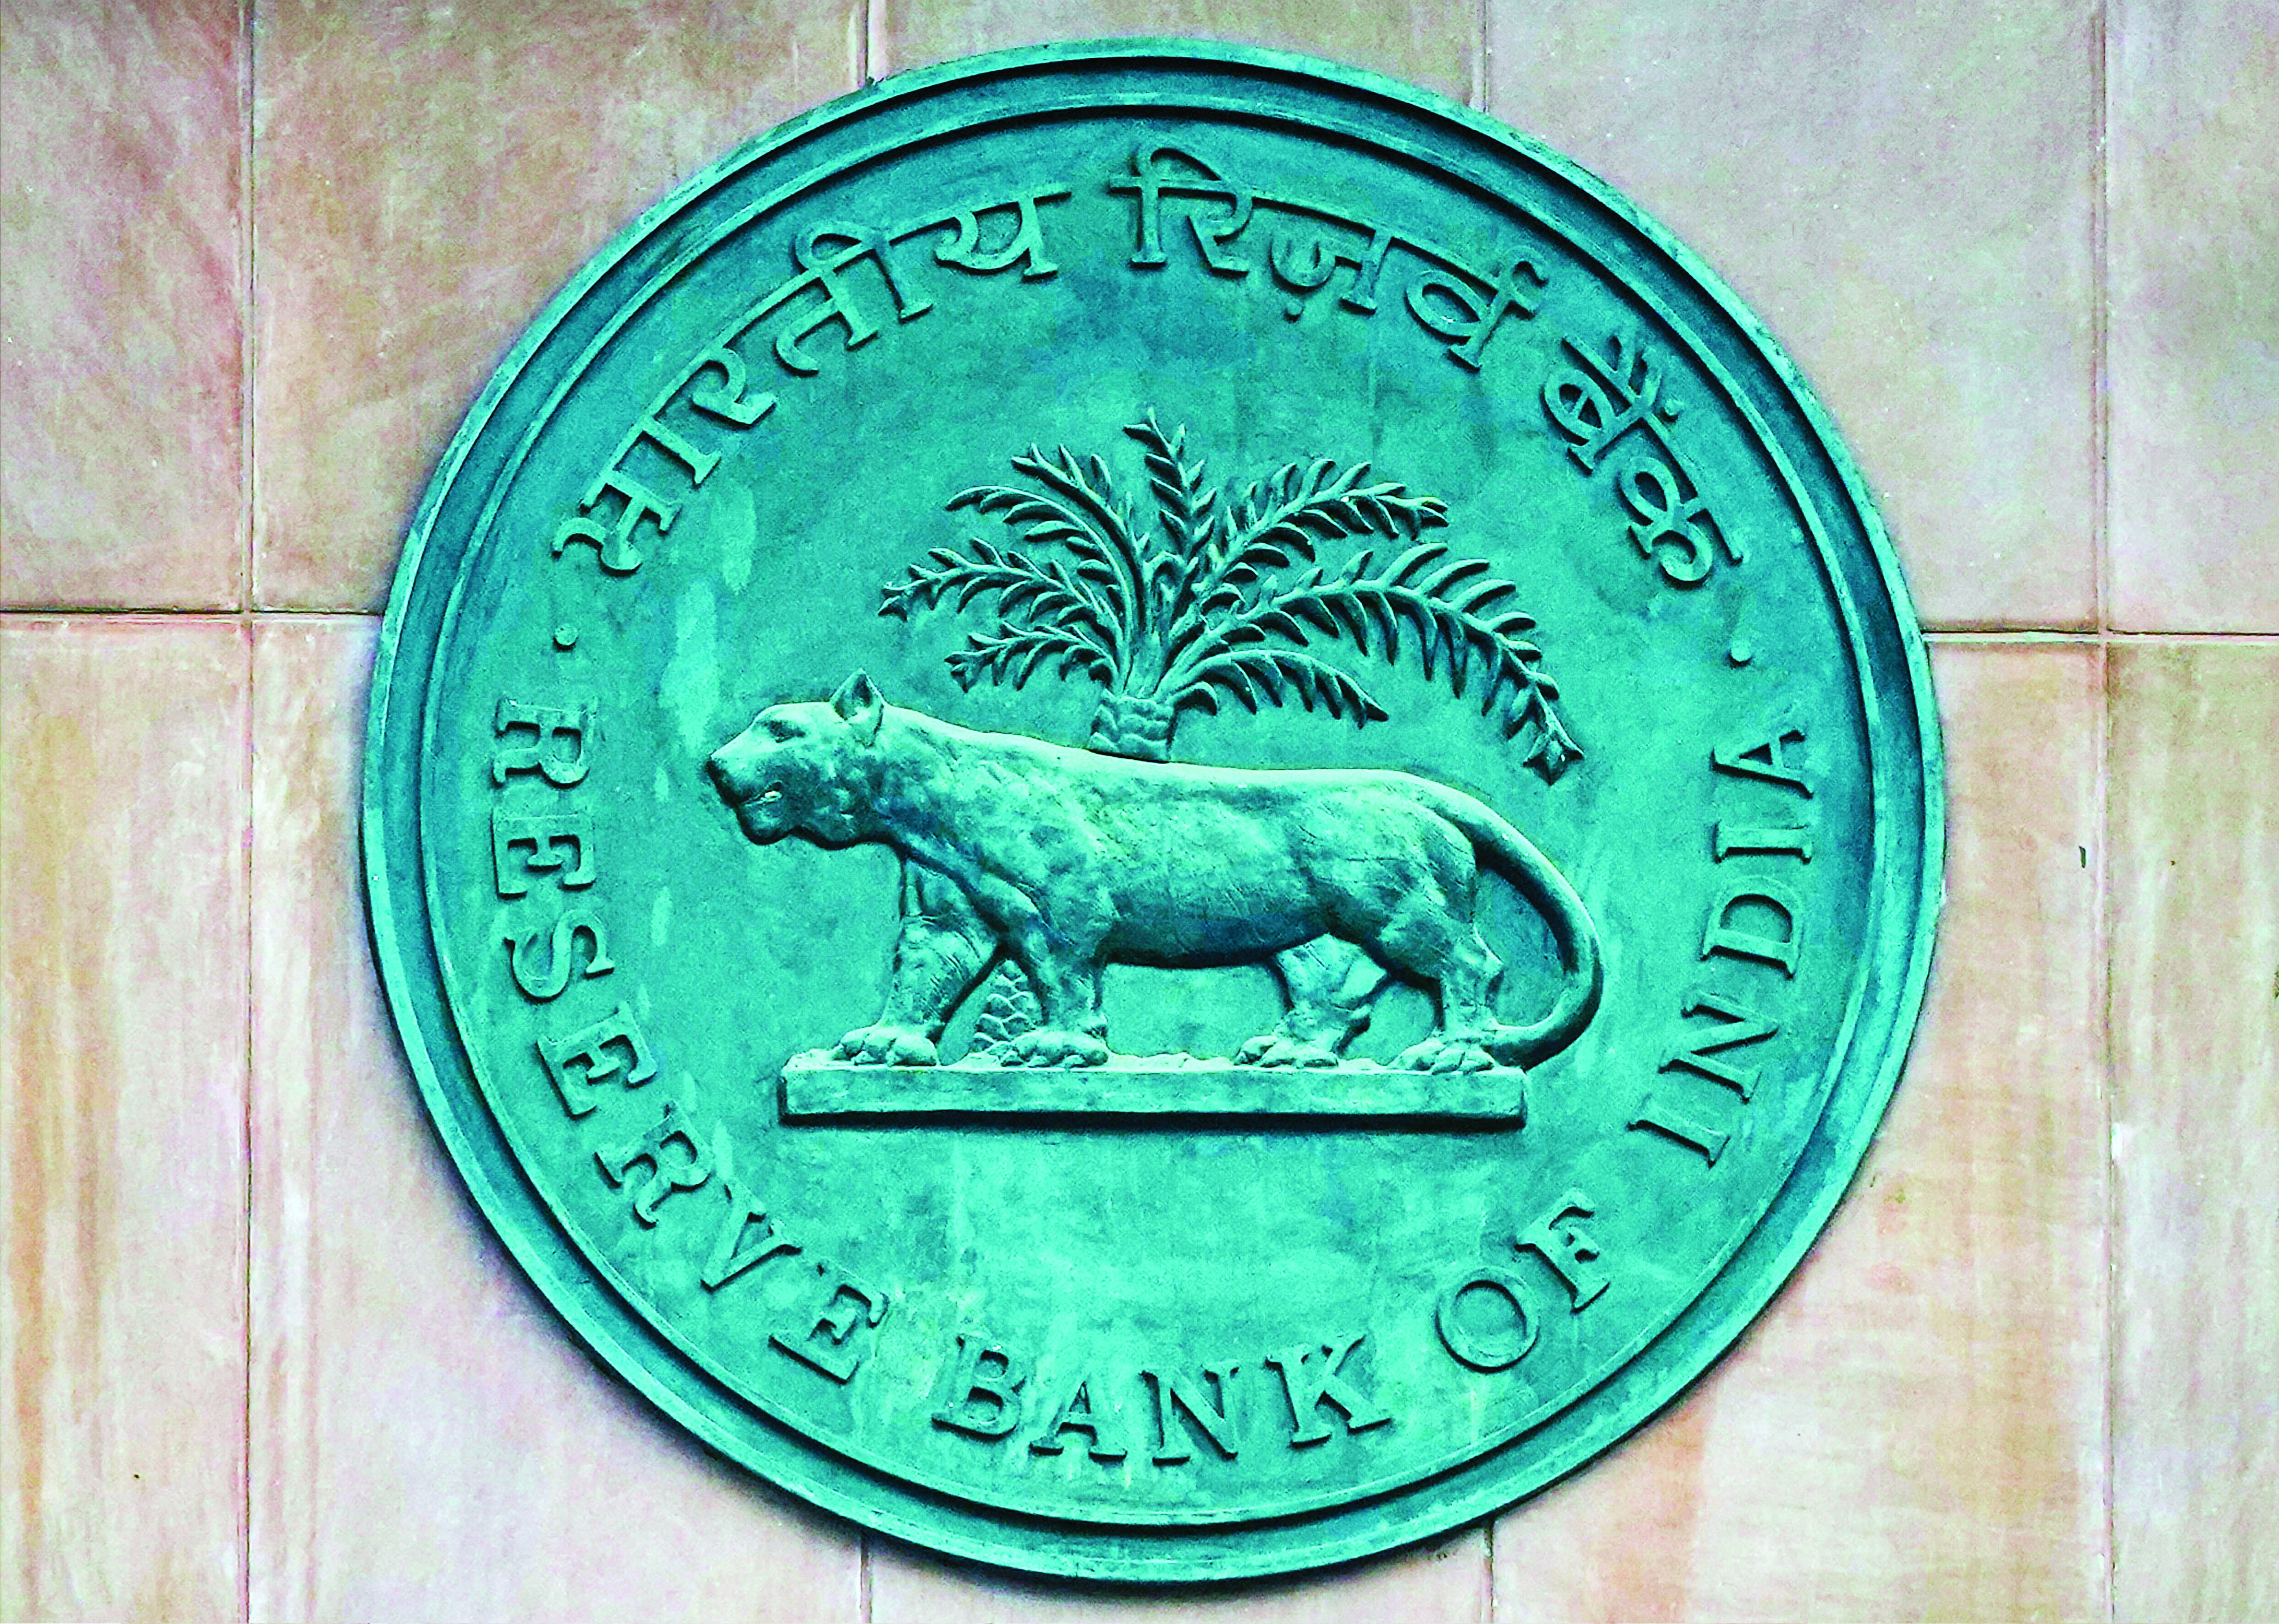 Sustained growth of 7% in FY25 & beyond is feasible for India: RBI MPC member